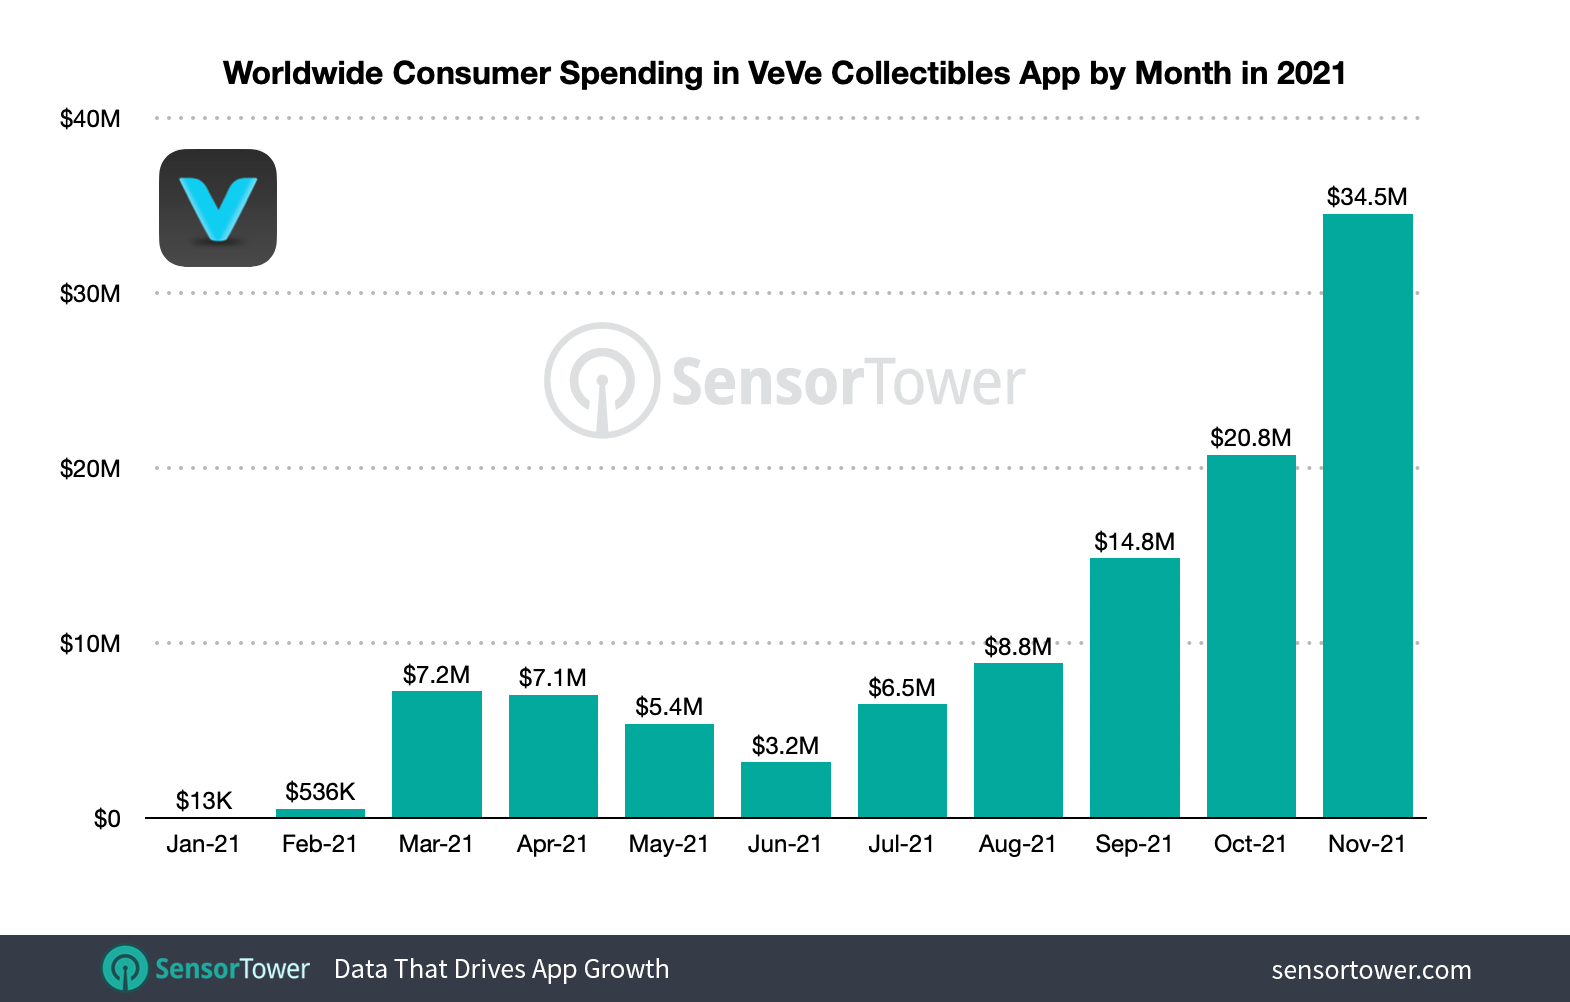 Consumer spending in VeVe reached $4.4 million Disney+ Day alone